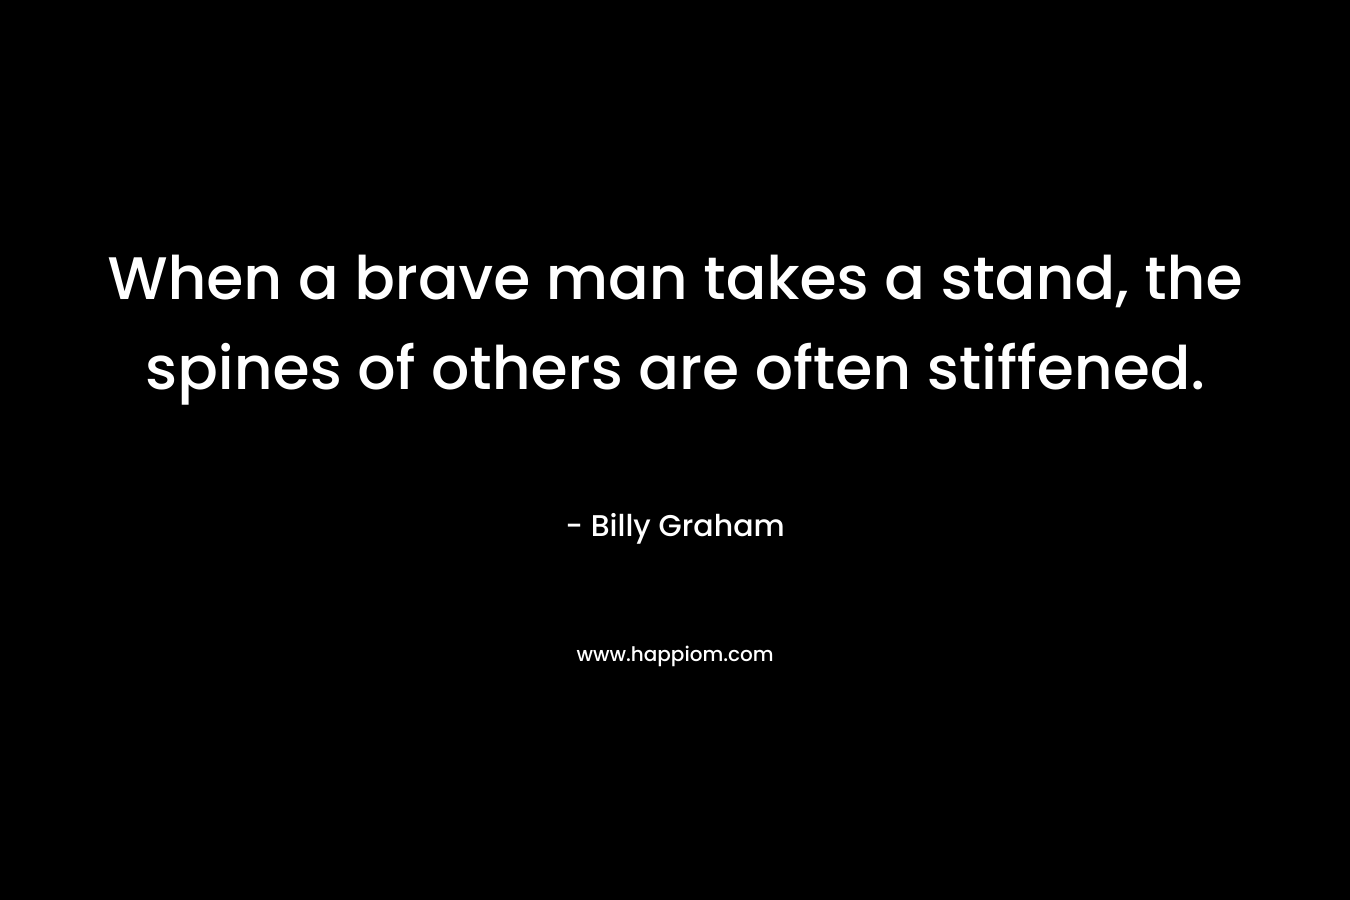 When a brave man takes a stand, the spines of others are often stiffened. – Billy Graham